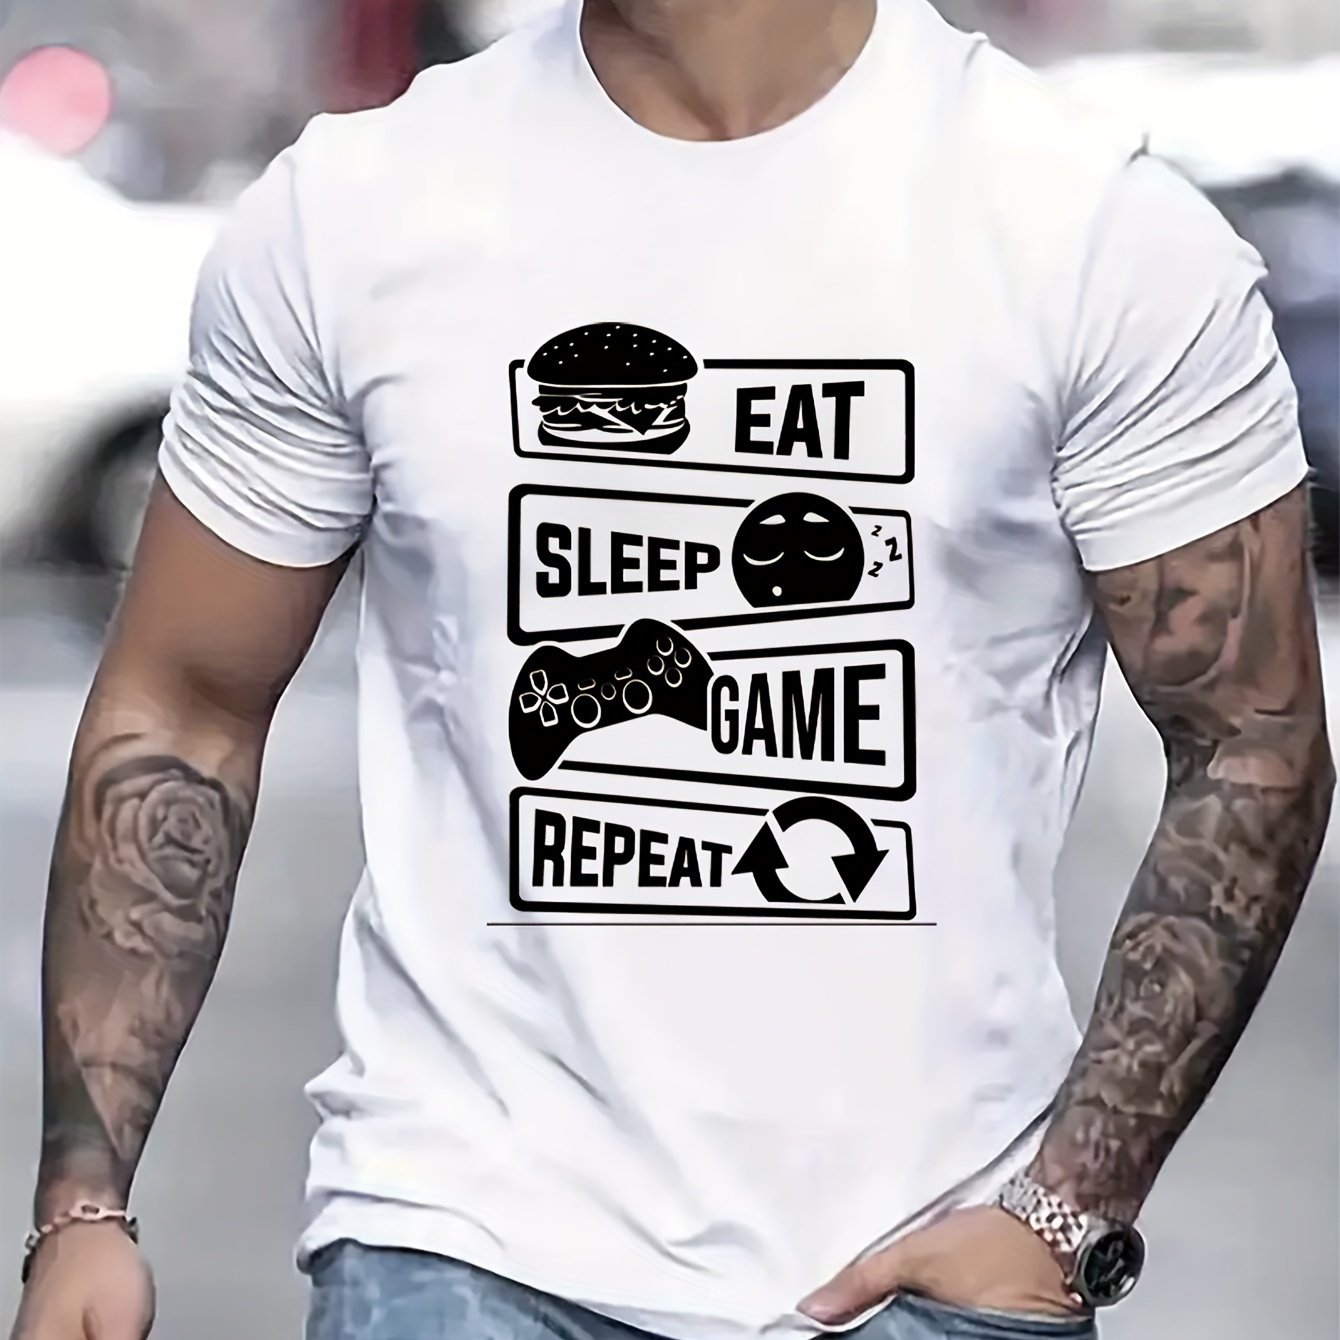 

Eat Sleep Game Repeat "stylish Print Summer & Spring Tee For Men, Casual Short Sleeve Fashion Style T-shirt, Sporty New Arrival Novelty Top For Leisure